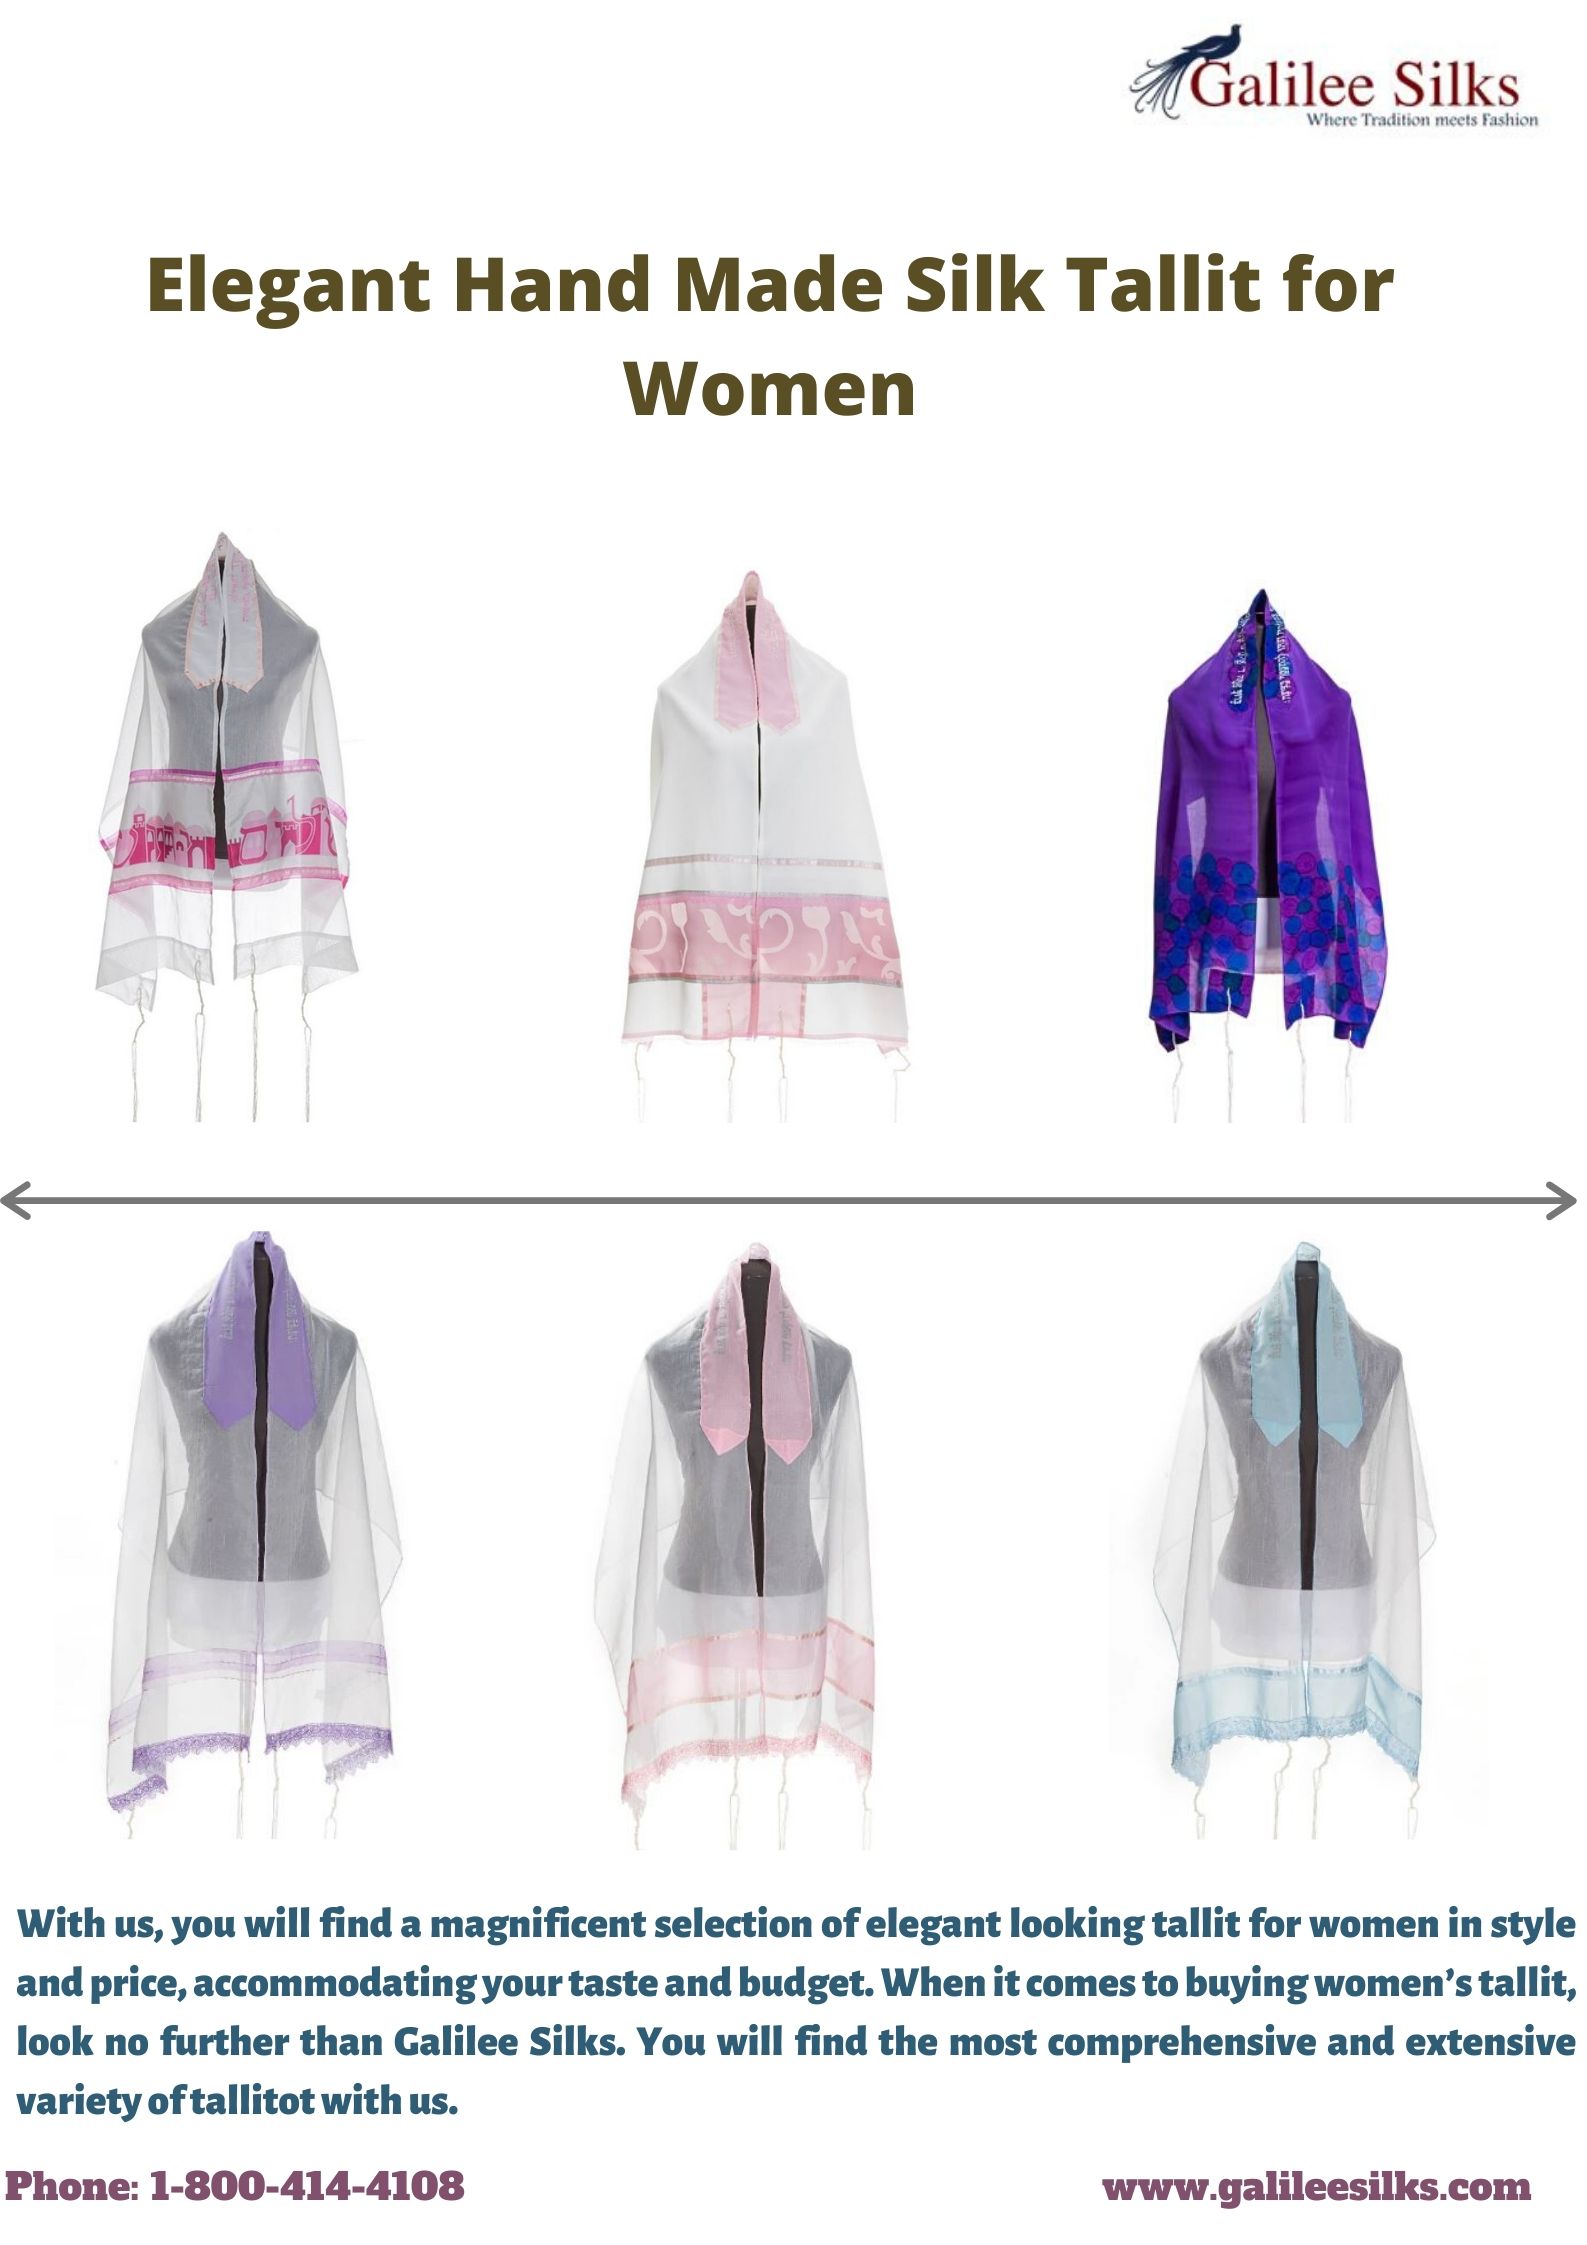 Elegant Hand Made Silk Tallit for Women At Galilee Silks, we strive to bring exclusive tallit for women collections that are a piece of perfection in the world of Judaica art. For more details, visit this link: https://bit.ly/2RHM7sK by amramrafi